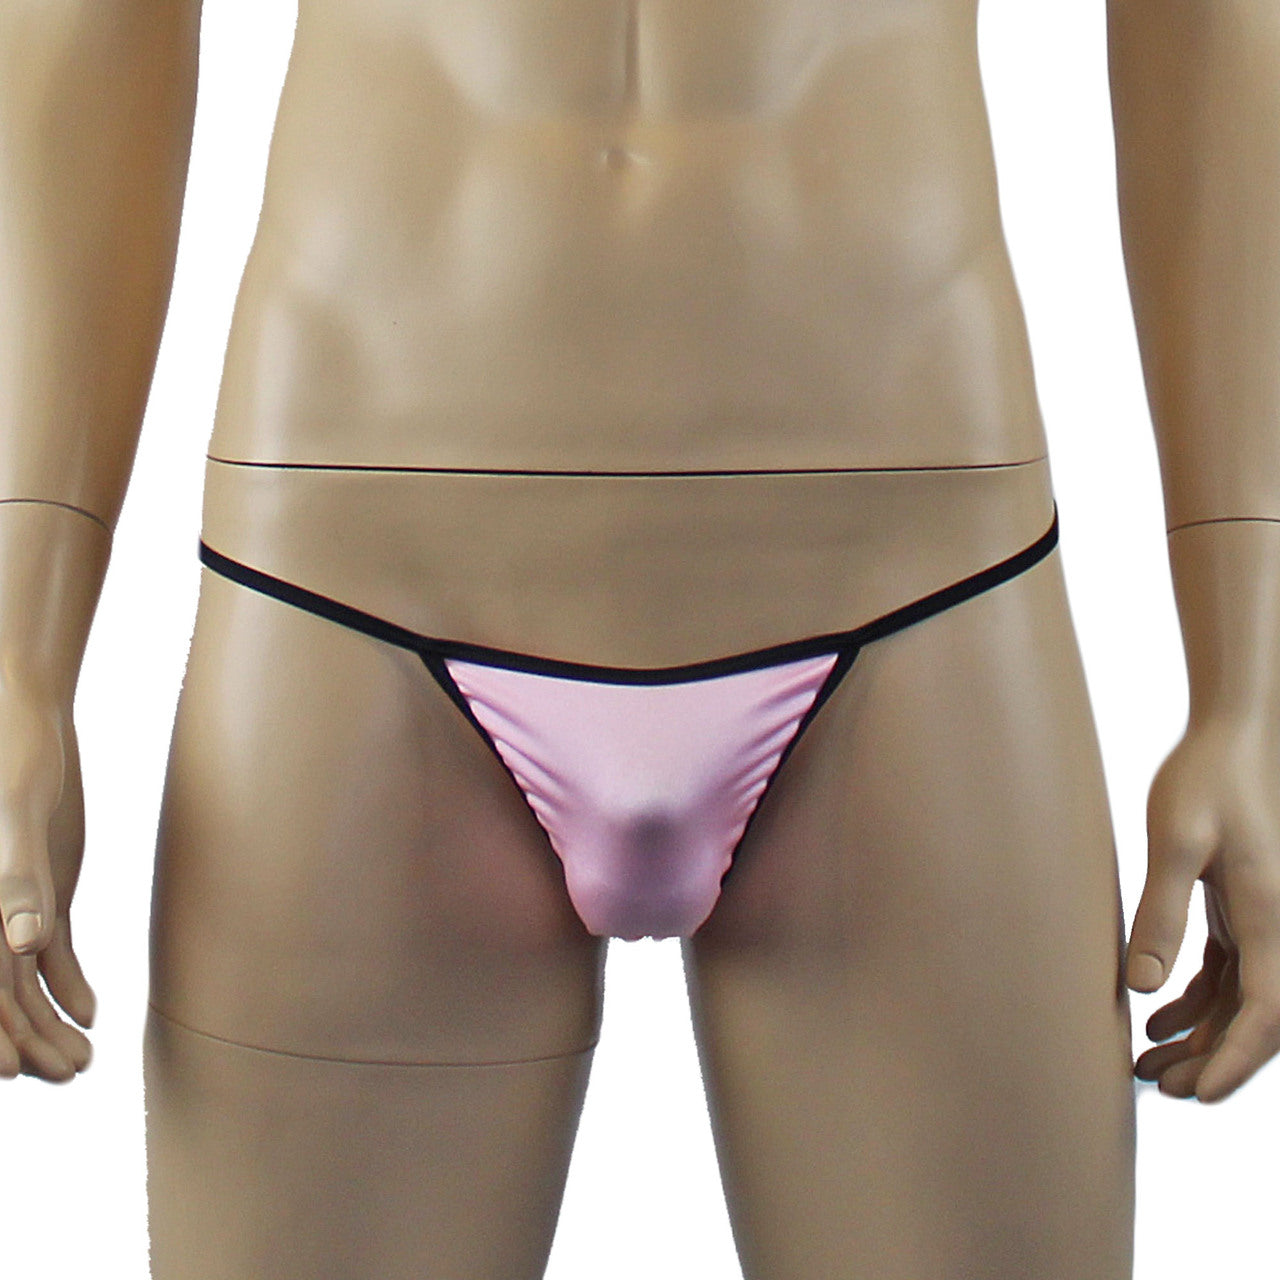 Mens Lingerie Twinkle Spandex Mini G string with Bow, Light Pink & Black